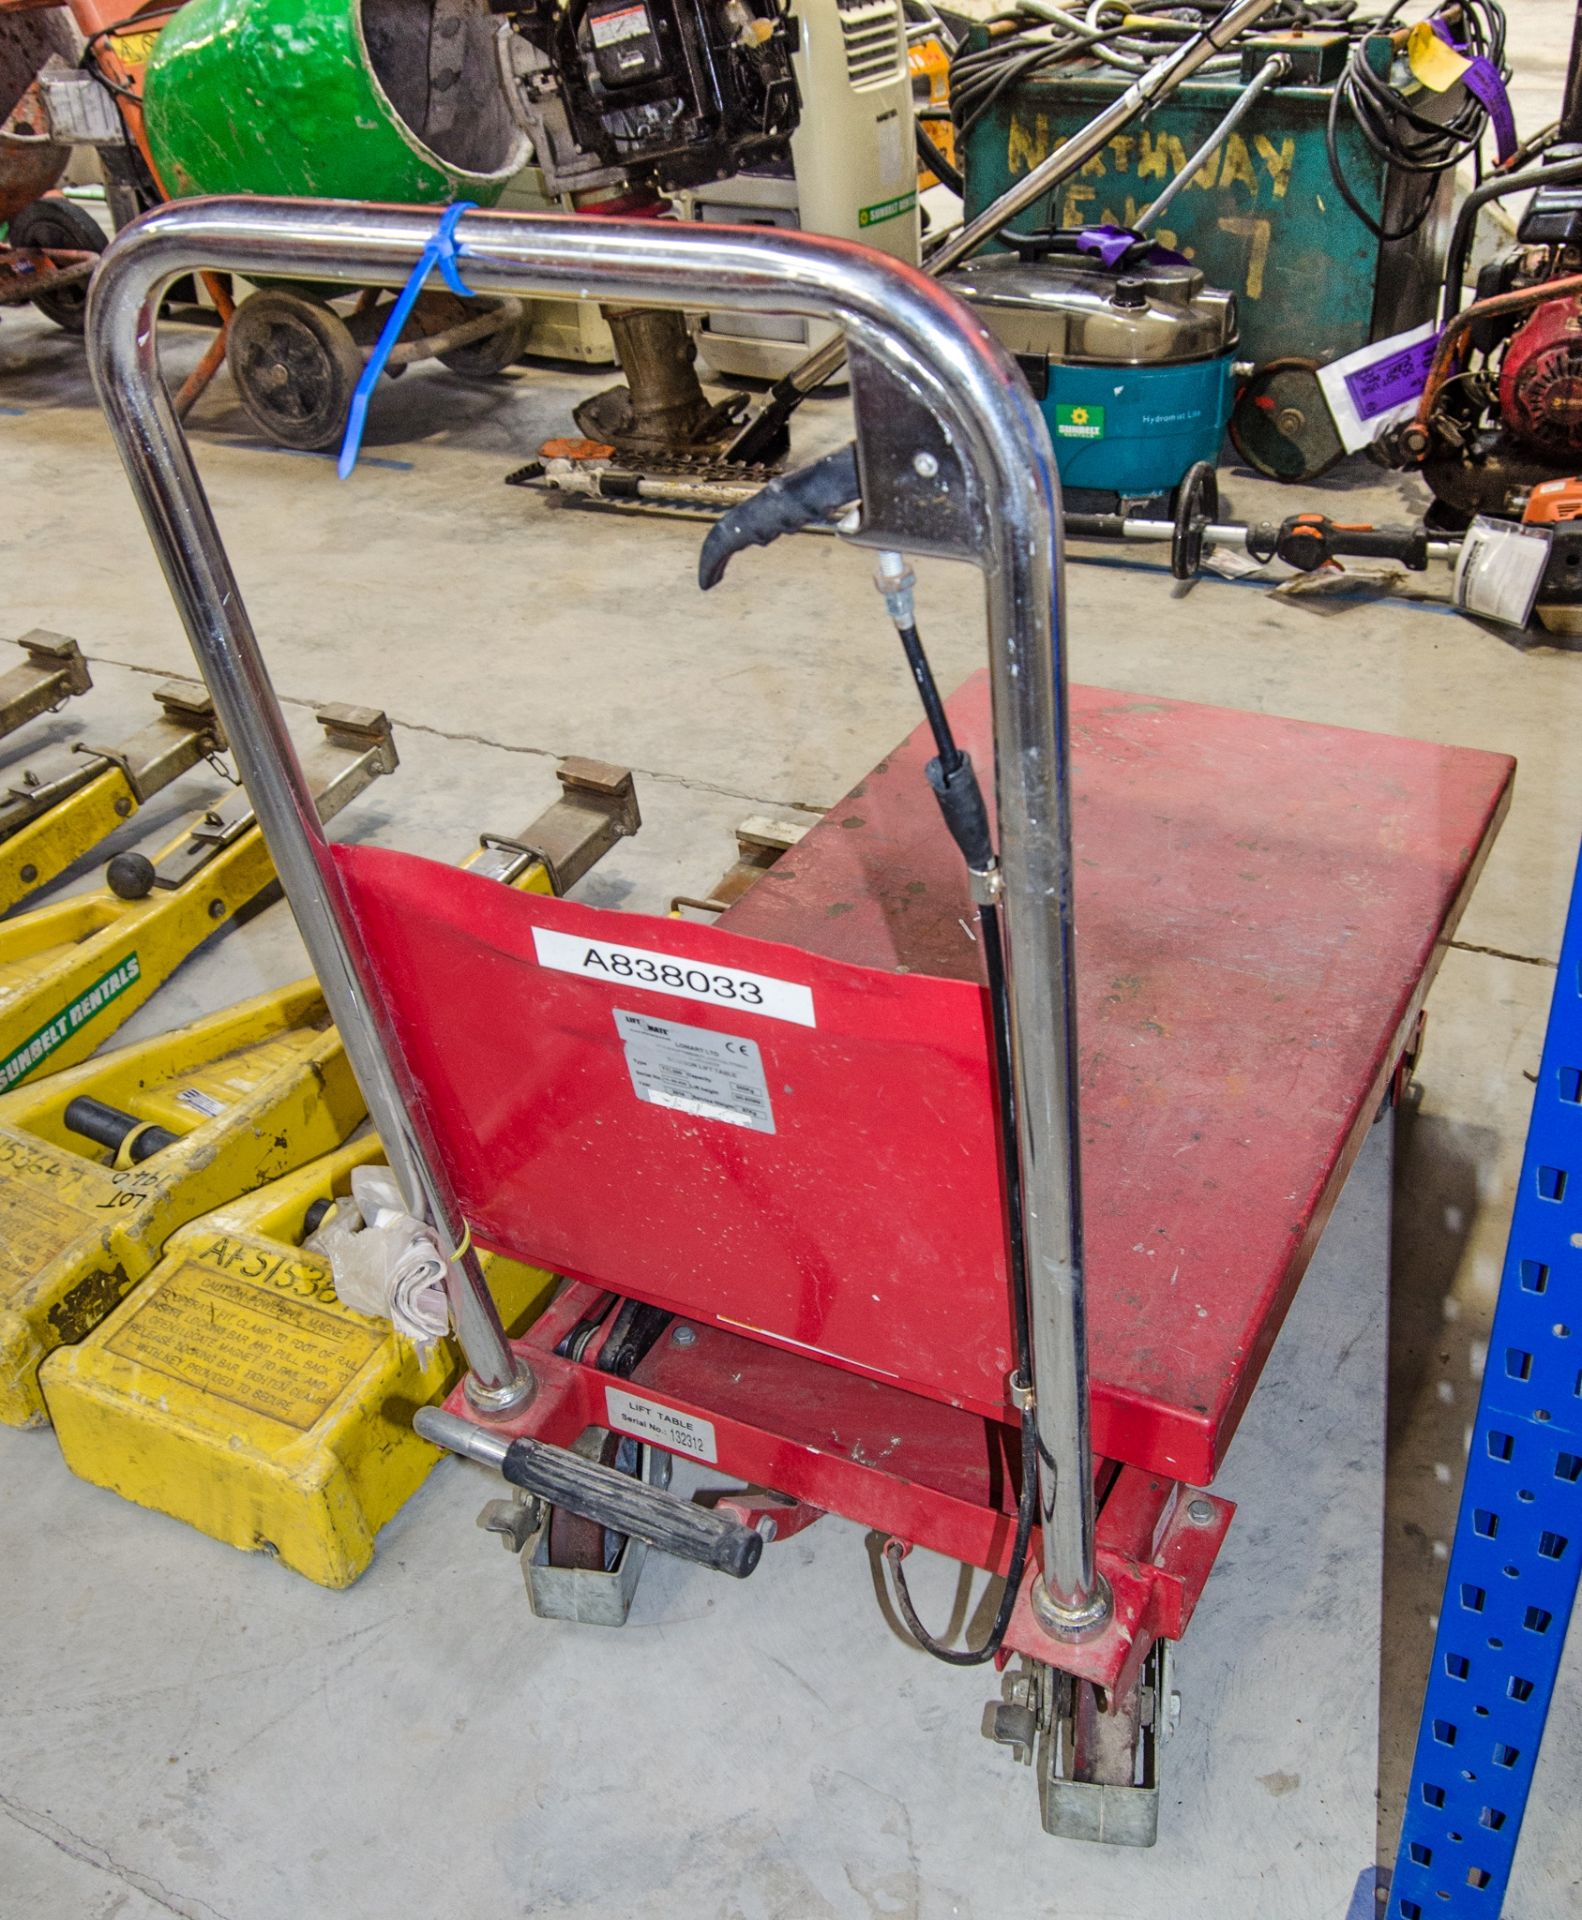 Hydraulic mobile lifting table A838033 - Image 2 of 2